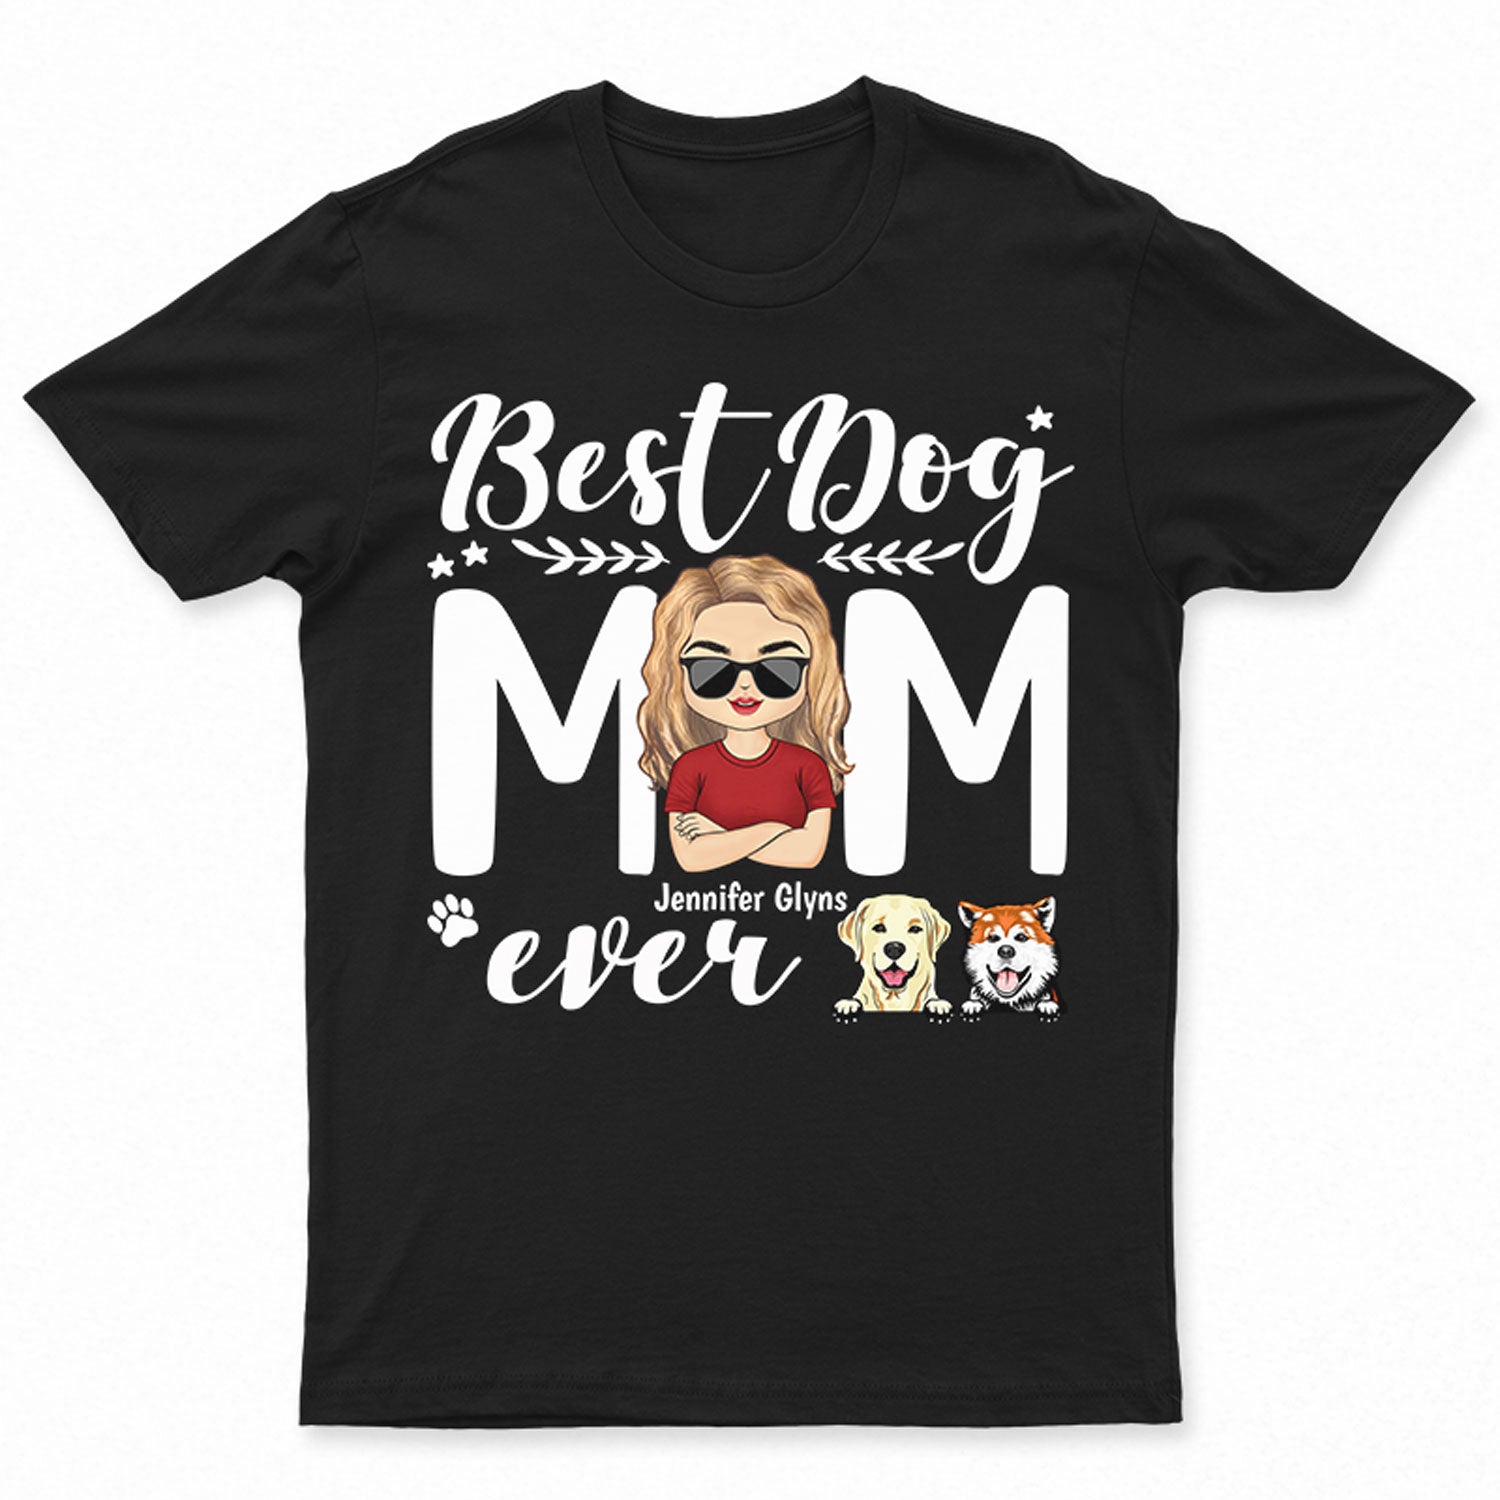 Best Dog Mom Ever, Dog Dad, Cat Mom, Cat Dad - Gift For Pet Lovers - Personalized Custom T Shirt